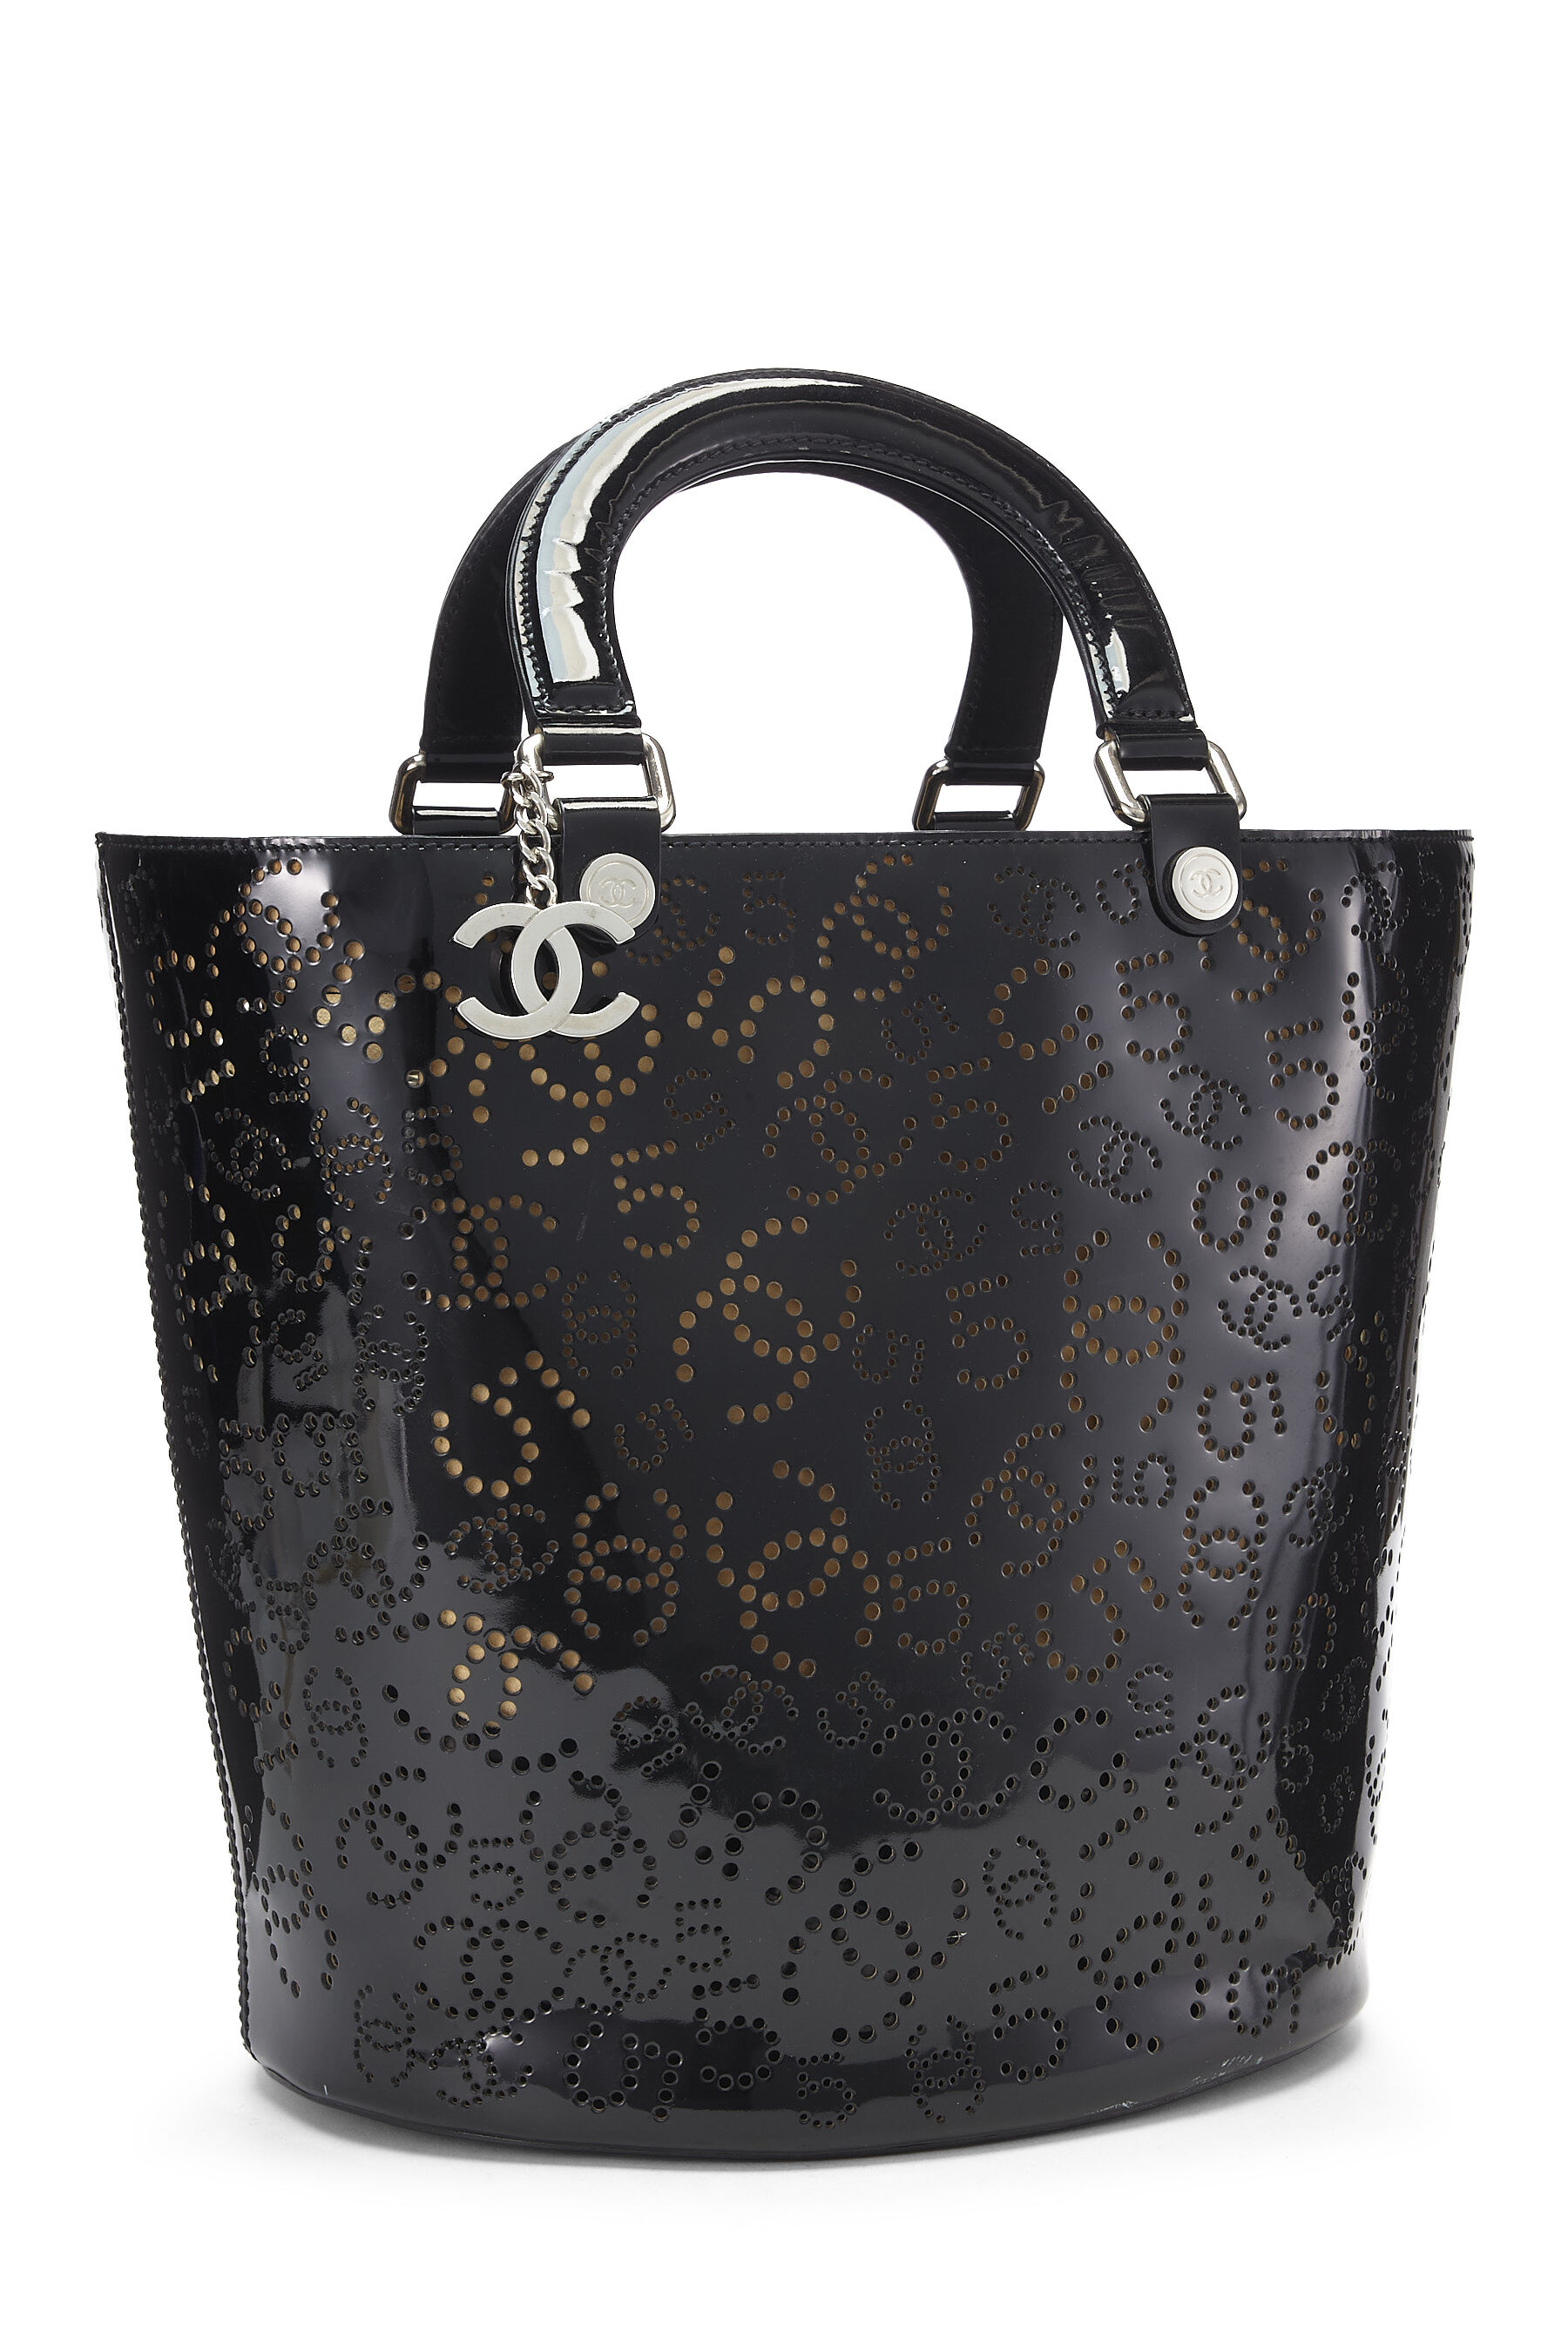 Chanel Perforated Patent Leather Vertical Bucket Tote